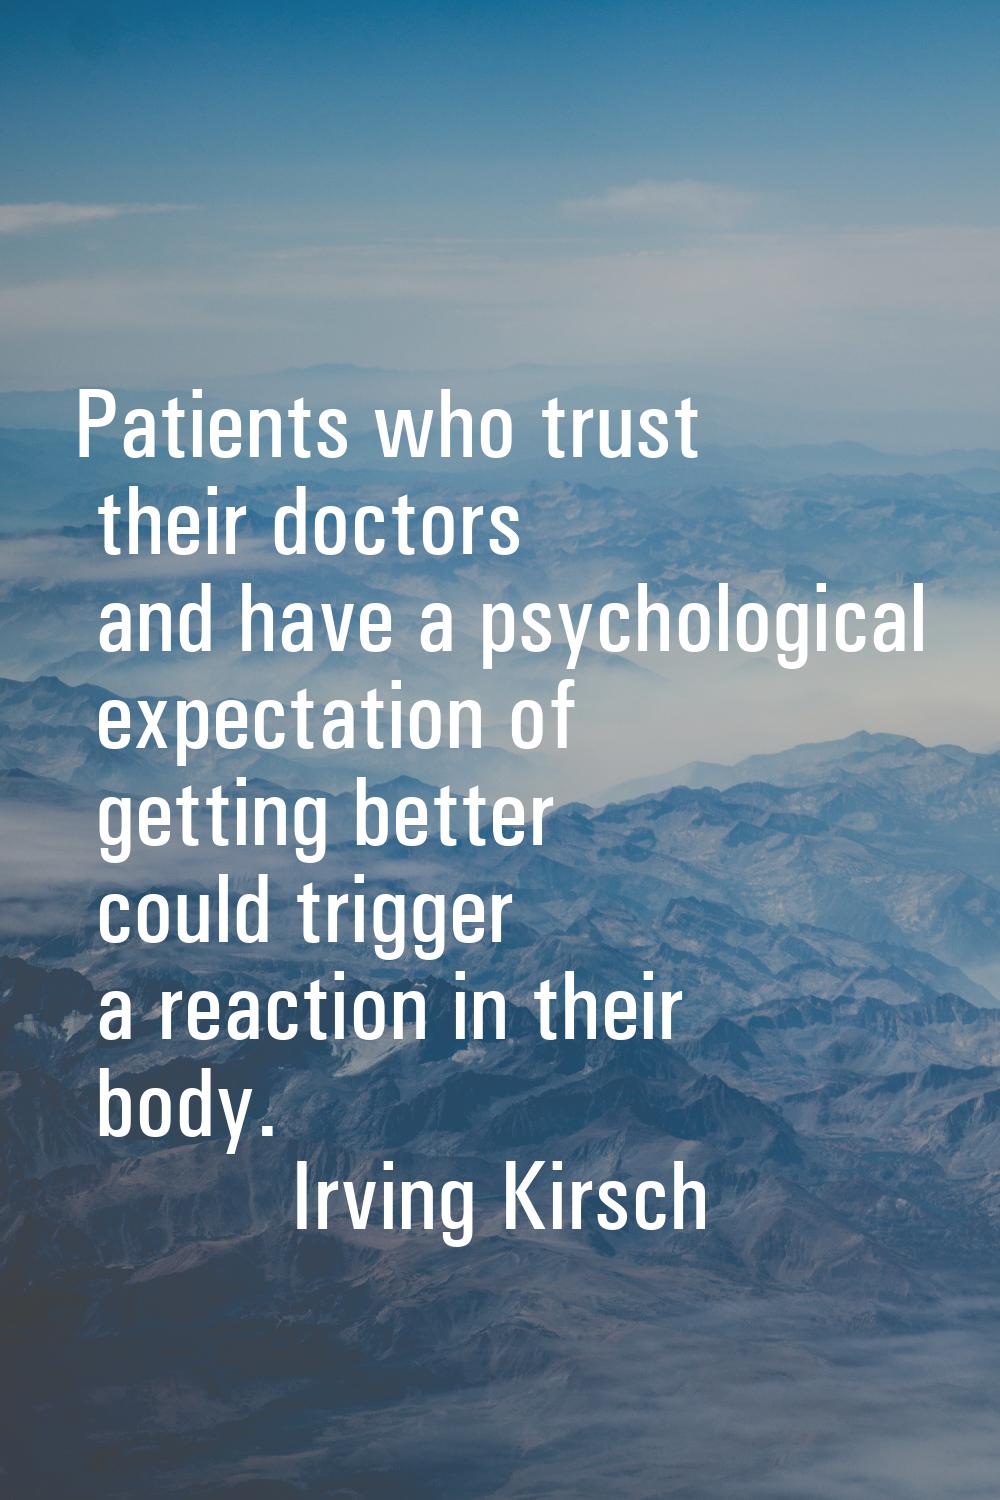 Patients who trust their doctors and have a psychological expectation of getting better could trigg